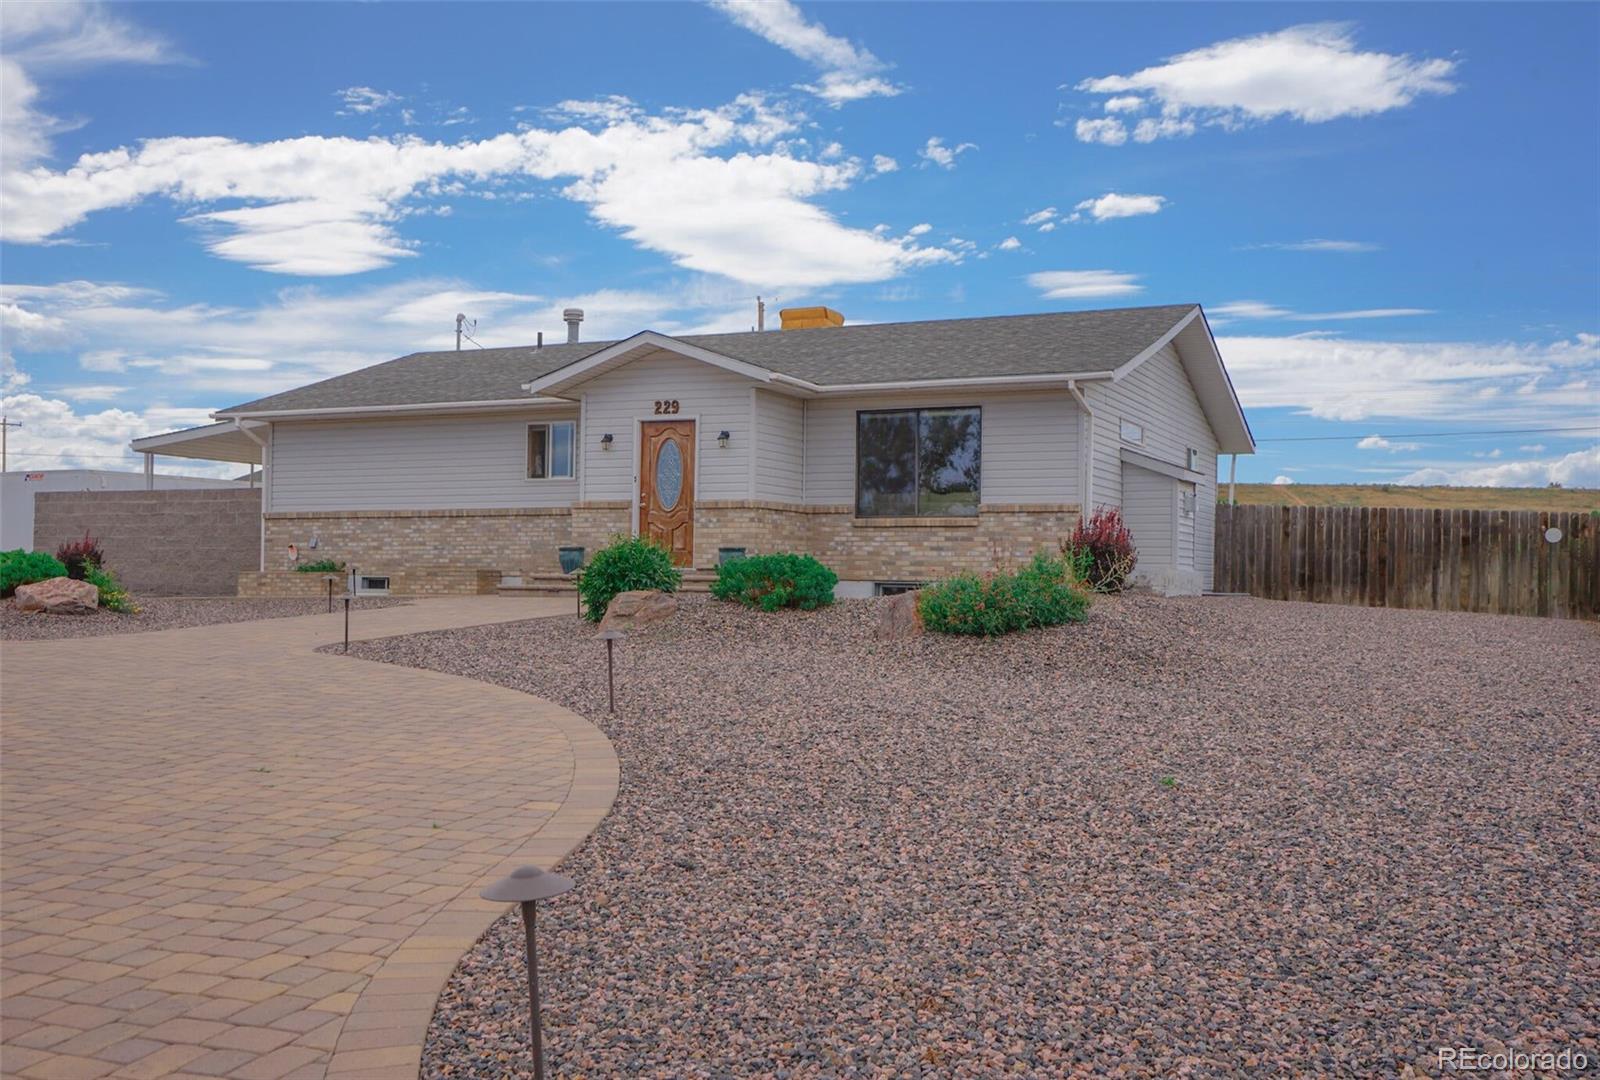 229  welton avenue, Walsenburg sold home. Closed on 2024-03-19 for $340,000.